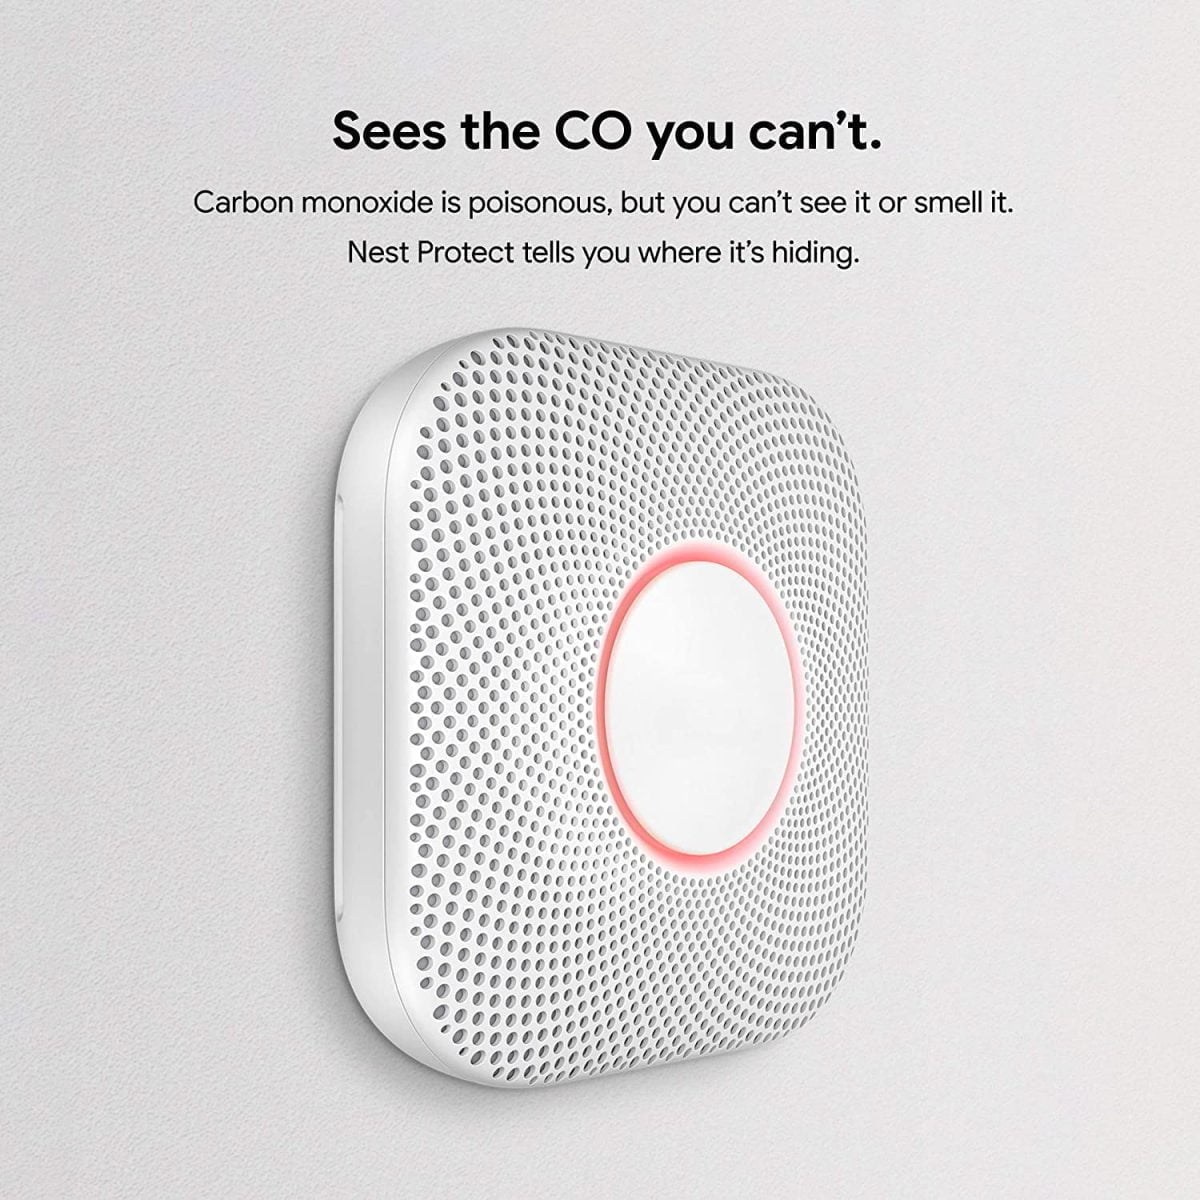 Google &Lt;H1&Gt;Google Nest Protect - Smoke Alarm - Smoke Detector And Carbon Monoxide Detector - Battery Operated , White - S3000Bwes&Lt;/H1&Gt; &Lt;Ul Class=&Quot;A-Unordered-List A-Vertical A-Spacing-Mini&Quot;&Gt; &Lt;Li&Gt;&Lt;Span Class=&Quot;A-List-Item&Quot;&Gt; Smoke Detector And Carbon Monoxide Detector That Speaks Up In A Friendly Voice To Give You An Early Warning When There'S Smoke Or Co In Your Home &Lt;/Span&Gt;&Lt;/Li&Gt; &Lt;Li&Gt;&Lt;Span Class=&Quot;A-List-Item&Quot;&Gt; Split Spectrum Sensor Looks For Both Fast Burning And Smoldering, And Tells You Where The Danger Is &Lt;/Span&Gt;&Lt;/Li&Gt; &Lt;Li&Gt;&Lt;Span Class=&Quot;A-List-Item&Quot;&Gt; Get Phone Alerts So You Know Something'S Wrong Even When You'Re Away From Home&Lt;/Span&Gt;&Lt;/Li&Gt; &Lt;Li&Gt;&Lt;Span Class=&Quot;A-List-Item&Quot;&Gt; Co Detector Looks Out For Carbon Monoxide And Tells You Where It'S Located &Lt;/Span&Gt;&Lt;/Li&Gt; &Lt;Li&Gt;&Lt;Span Class=&Quot;A-List-Item&Quot;&Gt; With App Silence You Can Silence The Smoke Alarm With Your Phone In The Nest App When There'S Only A Little Smoke &Lt;/Span&Gt;&Lt;/Li&Gt; &Lt;Li&Gt;&Lt;Span Class=&Quot;A-List-Item&Quot;&Gt; No Chirps To Tell You The Battery Is Low; Nest Protect Tests Its Own Batteries And Gives You A Nightly Promise When You Turn Off The Lights So You Know Everything Is Working &Lt;/Span&Gt;&Lt;/Li&Gt; &Lt;Li&Gt;&Lt;Span Class=&Quot;A-List-Item&Quot;&Gt; A Light In The Dark: Usually Nest Protect Has Its Light Turned Off But When You Walk Underneath It Pathlight Can Light Your Way. &Lt;/Span&Gt;&Lt;/Li&Gt; &Lt;/Ul&Gt; &Lt;Div Class=&Quot;A-Row A-Expander-Container A-Expander-Inline-Container&Quot;&Gt; &Lt;Div Class=&Quot;A-Expander-Content A-Expander-Extend-Content A-Expander-Content-Expanded&Quot;&Gt; &Lt;Ul Class=&Quot;A-Unordered-List A-Vertical A-Spacing-None&Quot;&Gt; &Lt;Li&Gt;&Lt;Span Class=&Quot;A-List-Item&Quot;&Gt;The Nest Smoke And Carbon Monoxide Alarm Has Sensors With A 10-Year Lifespan To Help Keep Your Family Safe For Up To A Decade&Lt;/Span&Gt;&Lt;/Li&Gt; &Lt;Li&Gt;&Lt;Span Class=&Quot;A-List-Item&Quot;&Gt;With Safety Check You Can Test All Your Smoke And Co Alarms With Just A Tap And Get A Full Report Once The Test Is Done&Lt;/Span&Gt;&Lt;/Li&Gt; &Lt;Li&Gt;&Lt;Span Class=&Quot;A-List-Item&Quot;&Gt;Google Nest Protect (Battery) Packaged With A Google Seal For Online Marketplace&Lt;/Span&Gt;&Lt;/Li&Gt; &Lt;Li&Gt;&Lt;Span Class=&Quot;A-List-Item&Quot;&Gt;Know From Anywhere. Connect Nest Protect To Wi-Fi And It Will Send An Alert To Your Phone If The Alarm Goes Off Or The Batteries Run Low.&Lt;/Span&Gt;&Lt;/Li&Gt; &Lt;Li&Gt;&Lt;Span Class=&Quot;A-List-Item&Quot;&Gt;Tells You What And Where. It Speaks Up To Tell You If There’s Smoke Or Co And Where The Problem Is, So You Know What To Do. Connectivity: Bluetooth 4.0 Le, Wi-Fi 4 (802.11N)&Lt;/Span&Gt;&Lt;/Li&Gt; &Lt;Li&Gt;&Lt;Span Class=&Quot;A-List-Item&Quot;&Gt;App Silence. Nest Protect Is The First Alarm You Can Hush From Your Phone. Simply Walk To The Nest Protect That Noticed The Problem And Open The Nest App.&Lt;/Span&Gt;&Lt;/Li&Gt; &Lt;Li&Gt;&Lt;Span Class=&Quot;A-List-Item&Quot;&Gt;Split-Spectrum Sensor. In An Emergency, Seconds Count. Nest Protect Uses Two Wavelengths Of Light To Look For Both Fast And Slow Burning Fires.&Lt;/Span&Gt;&Lt;/Li&Gt; &Lt;Li&Gt;&Lt;Span Class=&Quot;A-List-Item&Quot;&Gt;Heads-Up. Get A Friendly Voice Alert So You Can Handle Burning Toast Before It Becomes A Burning Toaster.&Lt;/Span&Gt;&Lt;/Li&Gt; &Lt;Li&Gt;&Lt;Span Class=&Quot;A-List-Item&Quot;&Gt;10-Year Carbon Monoxide Sensor. Carbon Monoxide Is Odorless, Invisible And Deadly. When There’s Co, Nest Protect Tells You Where It’s Hiding.&Lt;/Span&Gt;&Lt;/Li&Gt; &Lt;/Ul&Gt; &Lt;/Div&Gt; &Lt;/Div&Gt; Google Nest Google Nest Protect Battery Operated - Smoke Alarm - Smoke Detector And Carbon Monoxide Detector -White - S3000Bwes